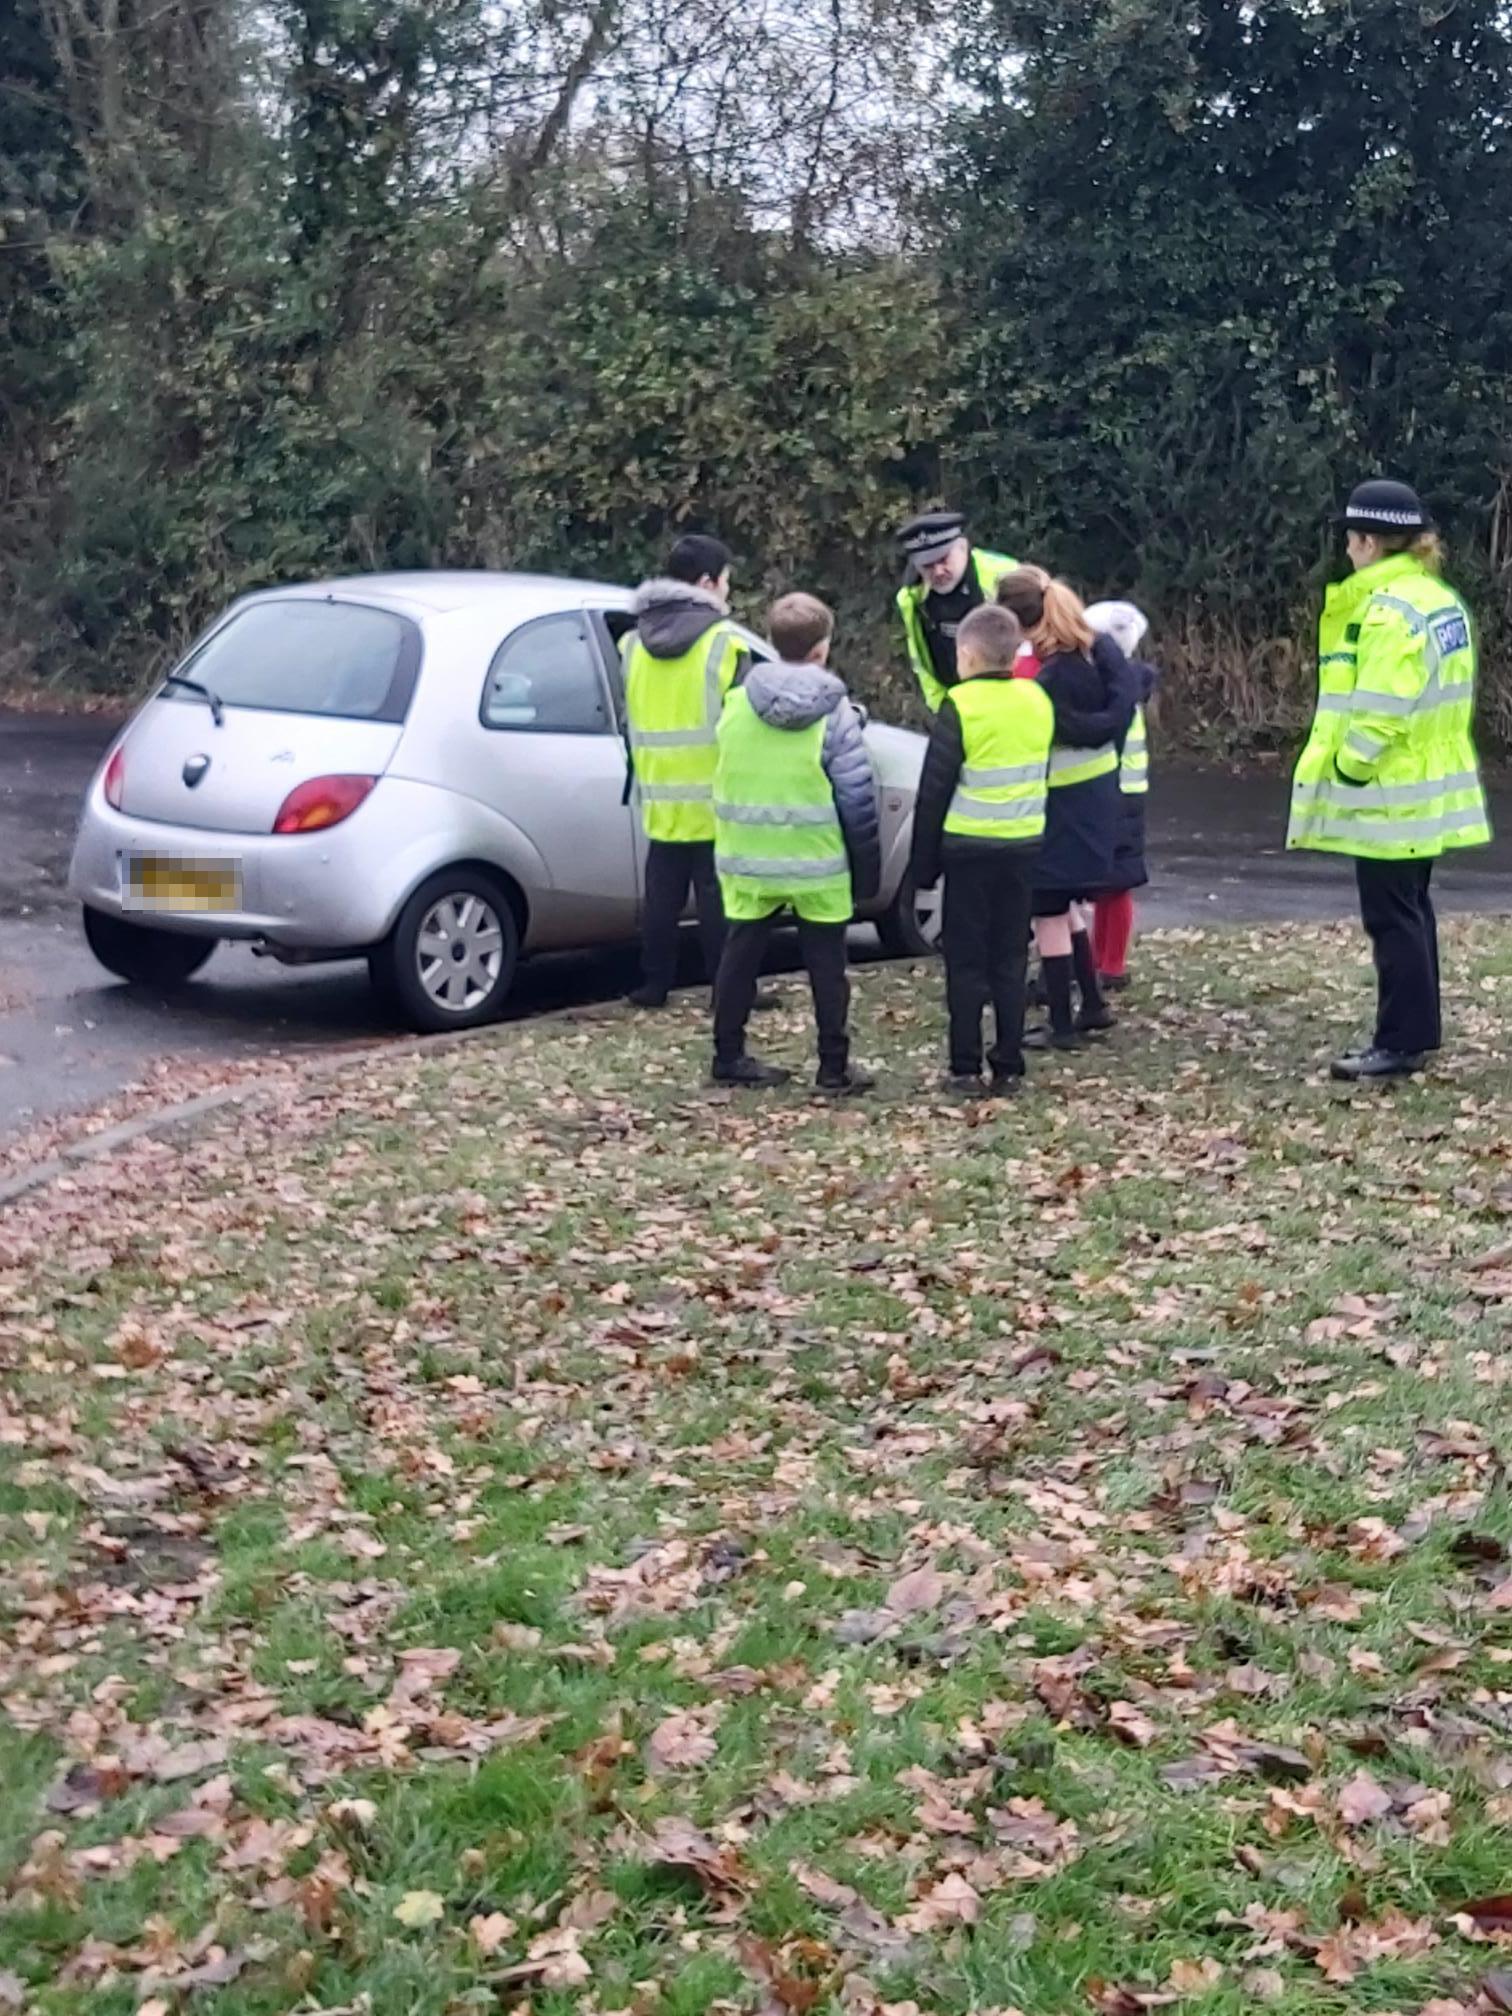 Slow down - pupils at Cherry Tree Academy got the chance to challenge speedy drivers Picture: Essex Police